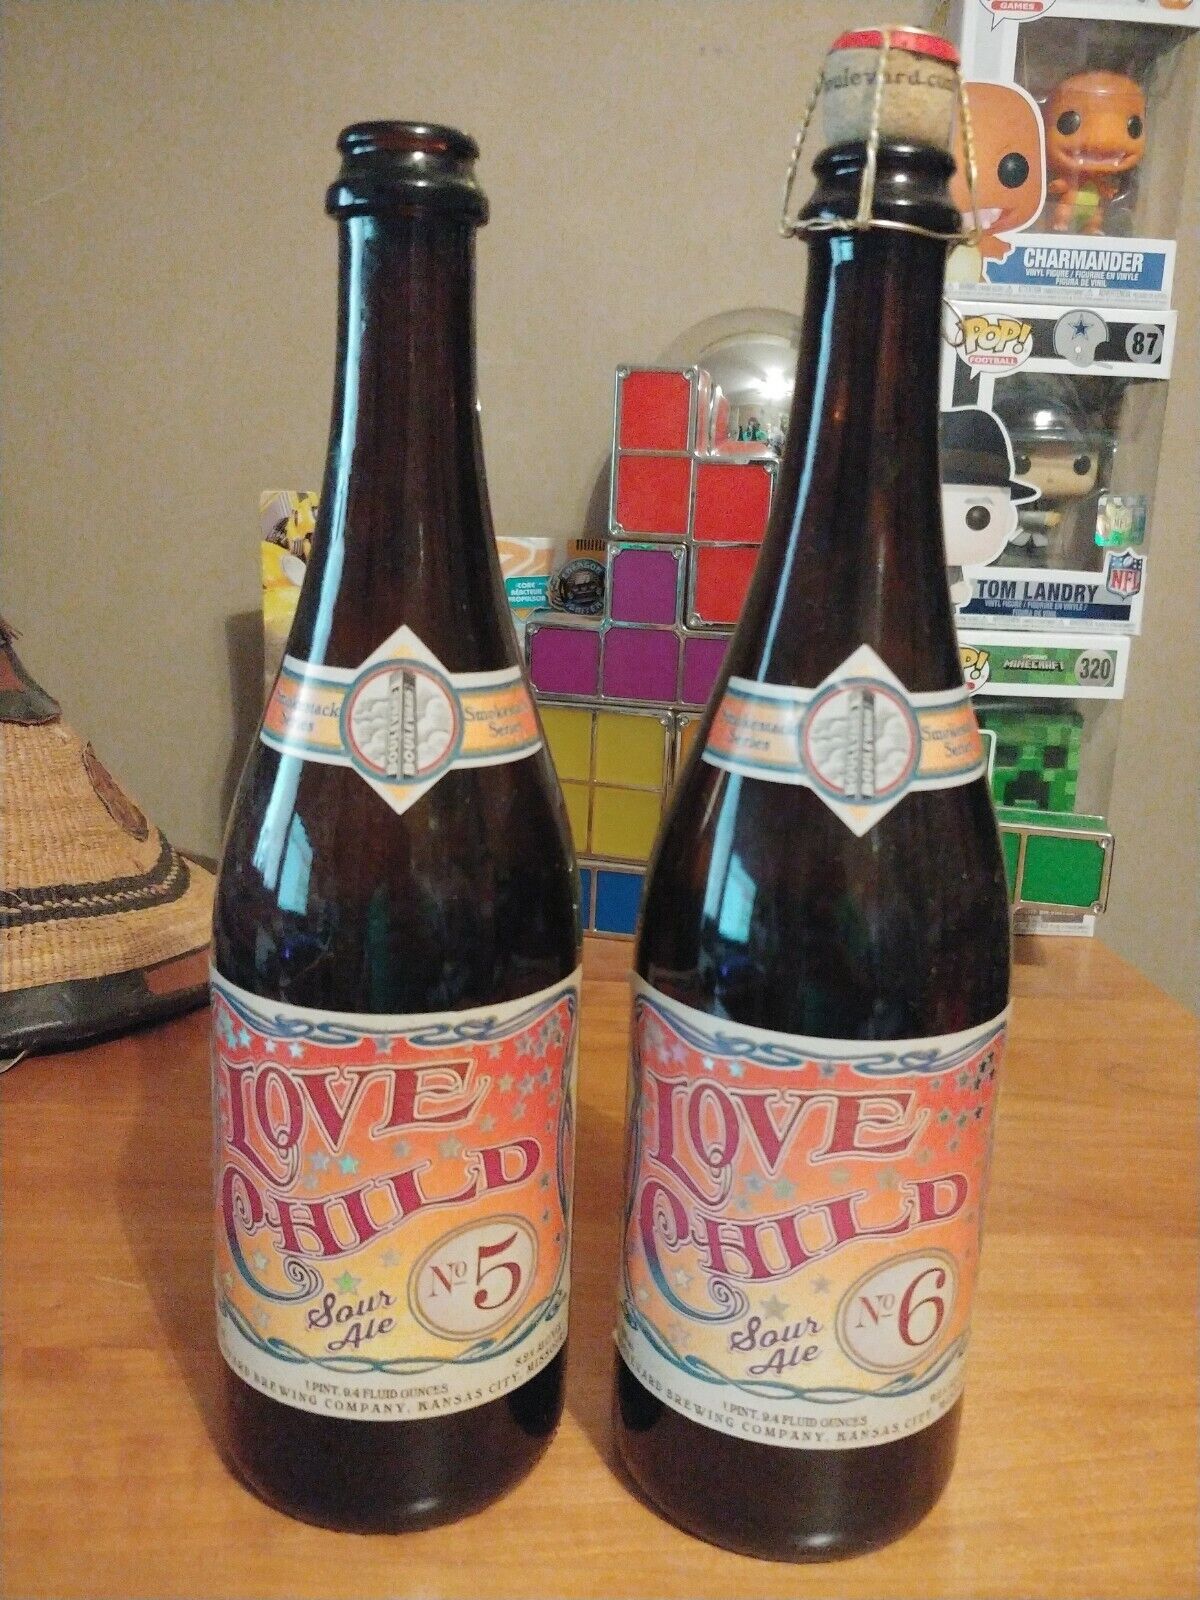 Boulevard Love Child No 5 And 6 Bottles Empty